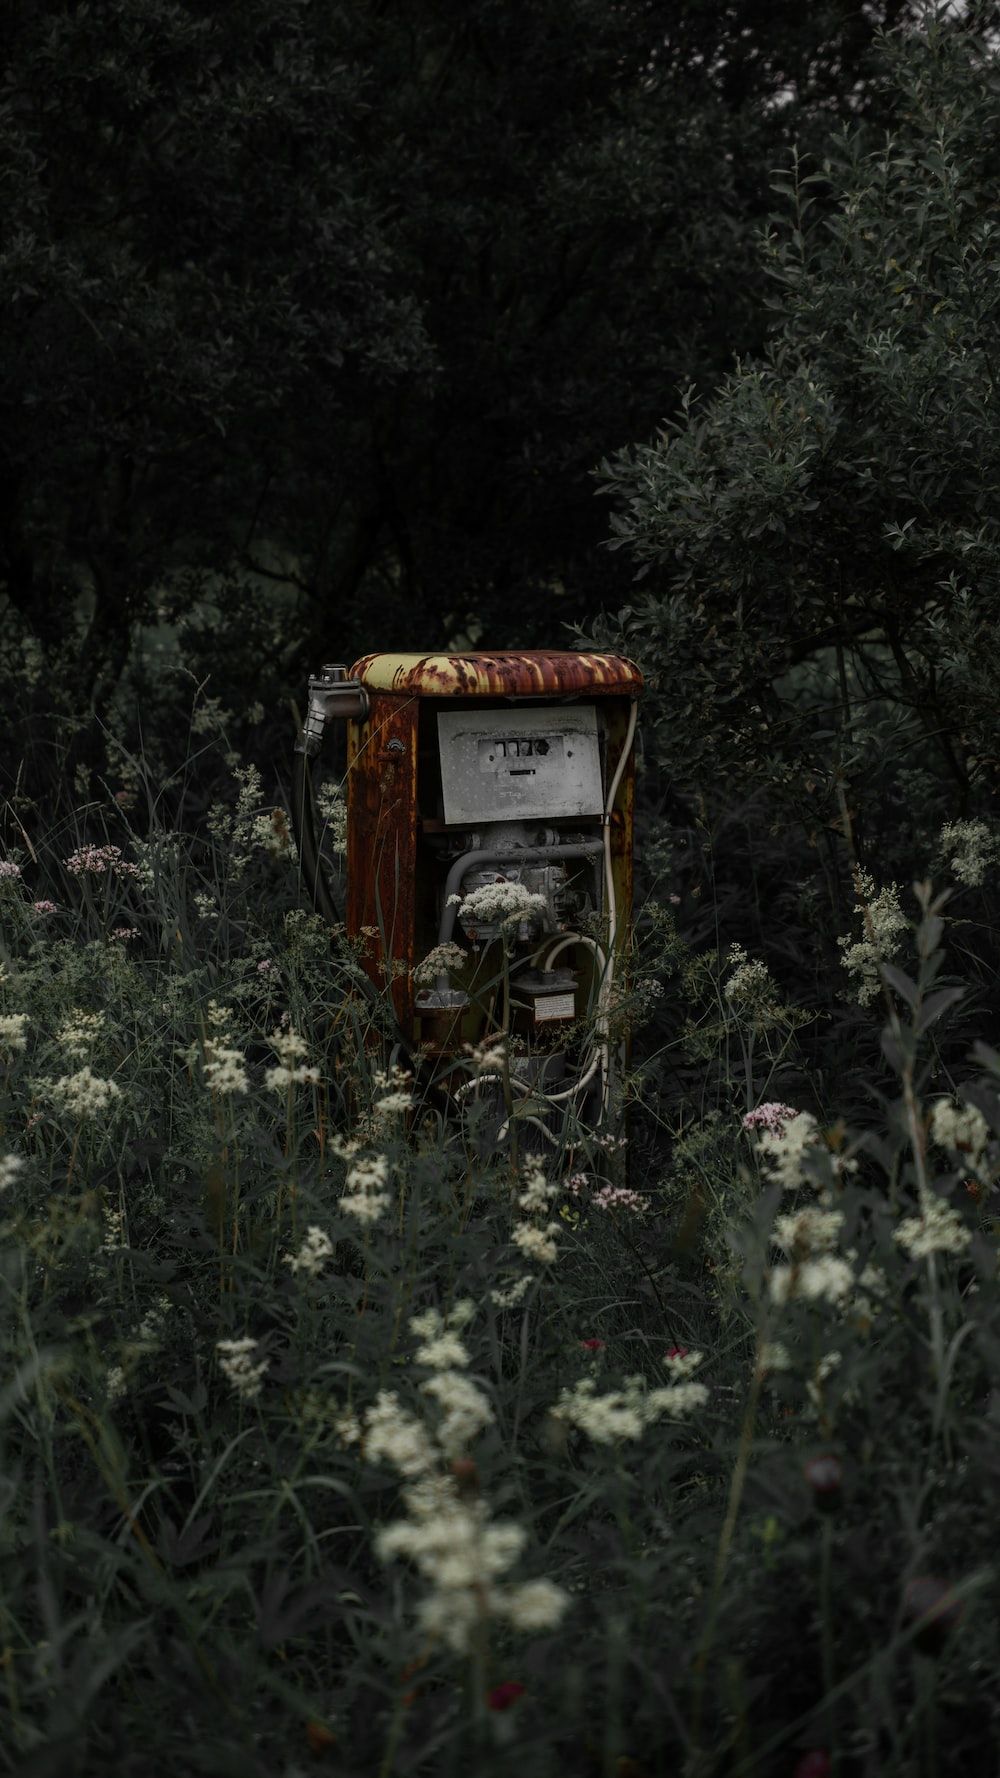 A refrigerator sitting in the middle of some bushes - Gothic